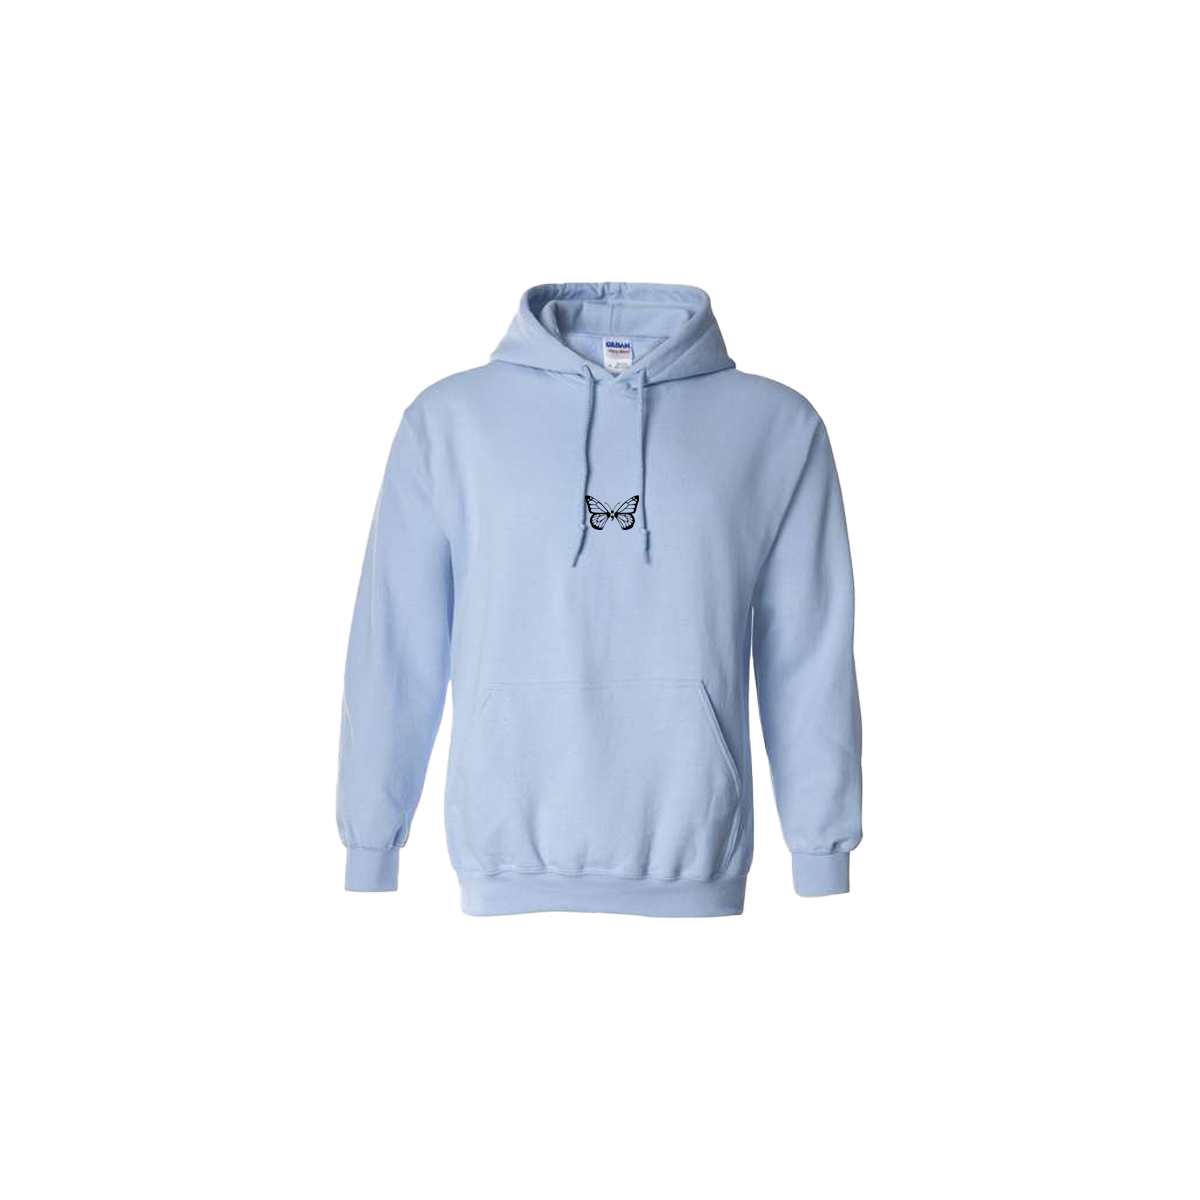 Butterfly Embroidered Light Blue Hoodie - Mental Health Awareness Clothing